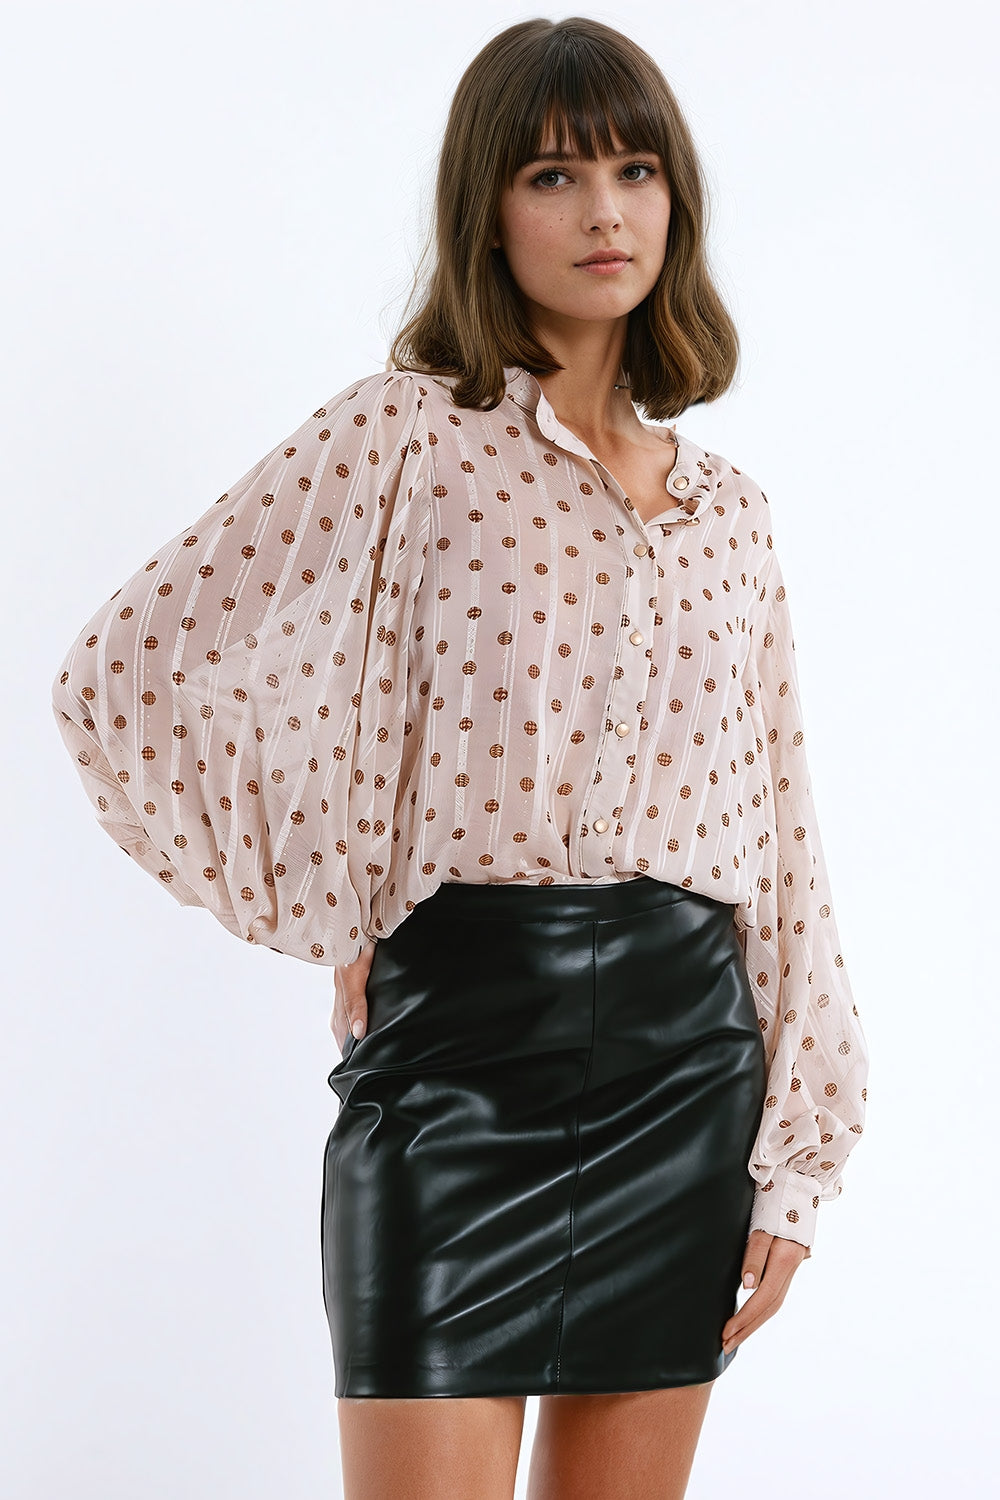 Q2 Blouse with balloon sleeves and polka dots in Beige